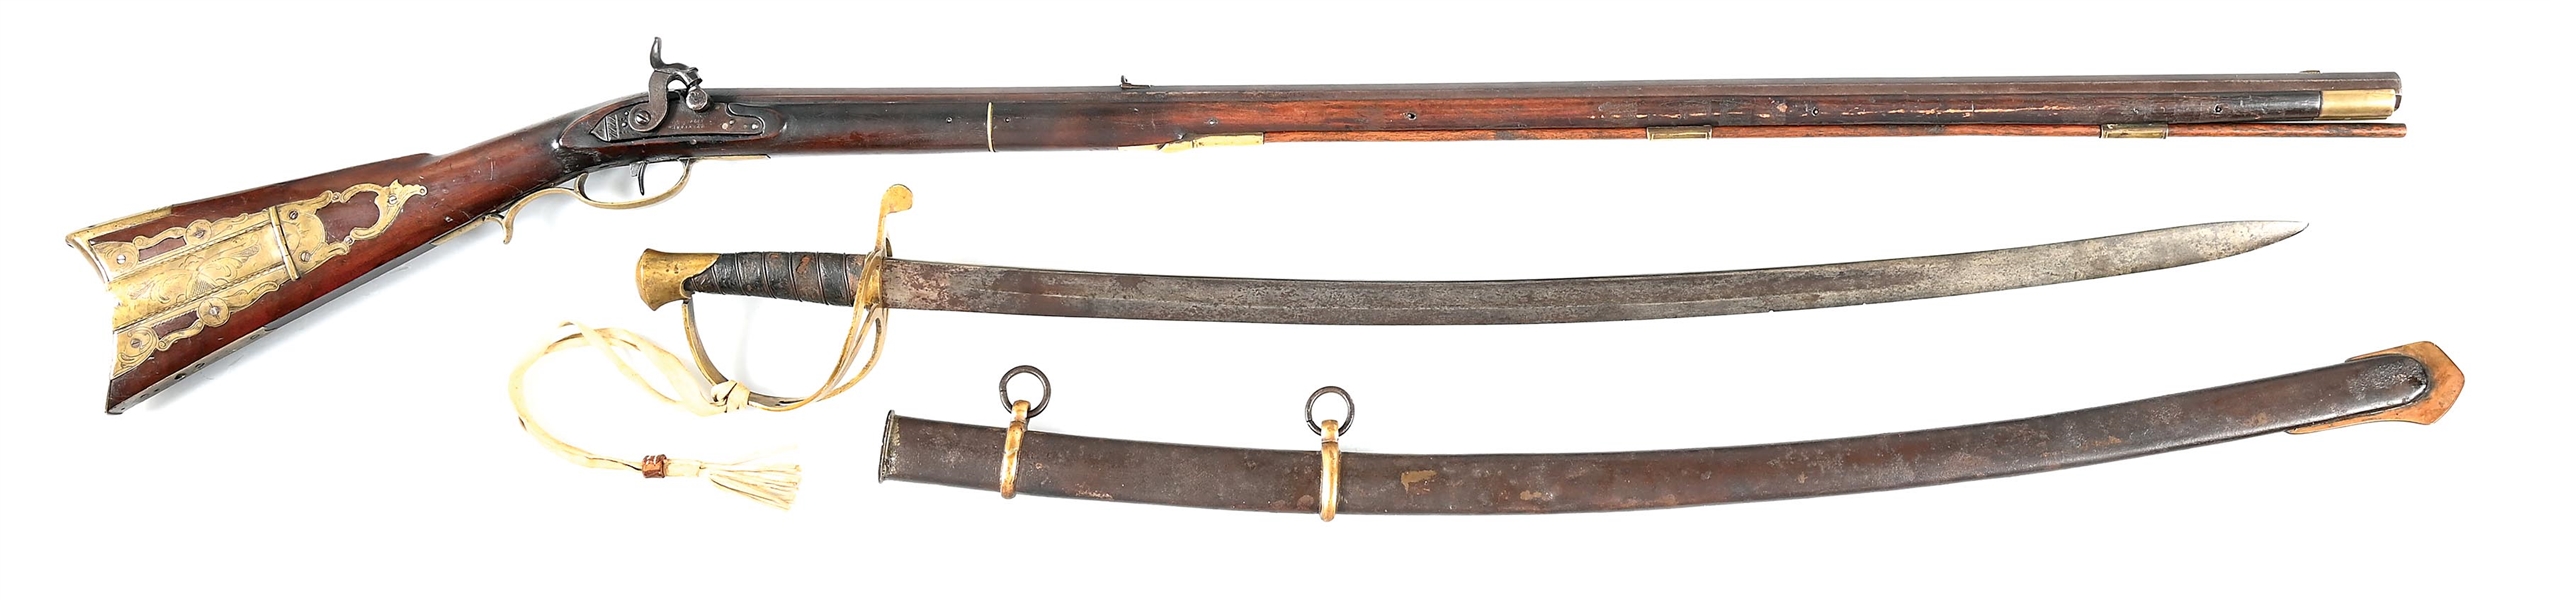 (A) KENTUCKY RIFLE AND HEAVY CAVALRY SABER CARRIED BY CAPTAIN WARNER GRIFFITH WELSH 7TH VA CAVALRY, 12TH VA CAVALRY, AND 1ST MD CAVALRY, ESCAPED FORT MCHENRY. 